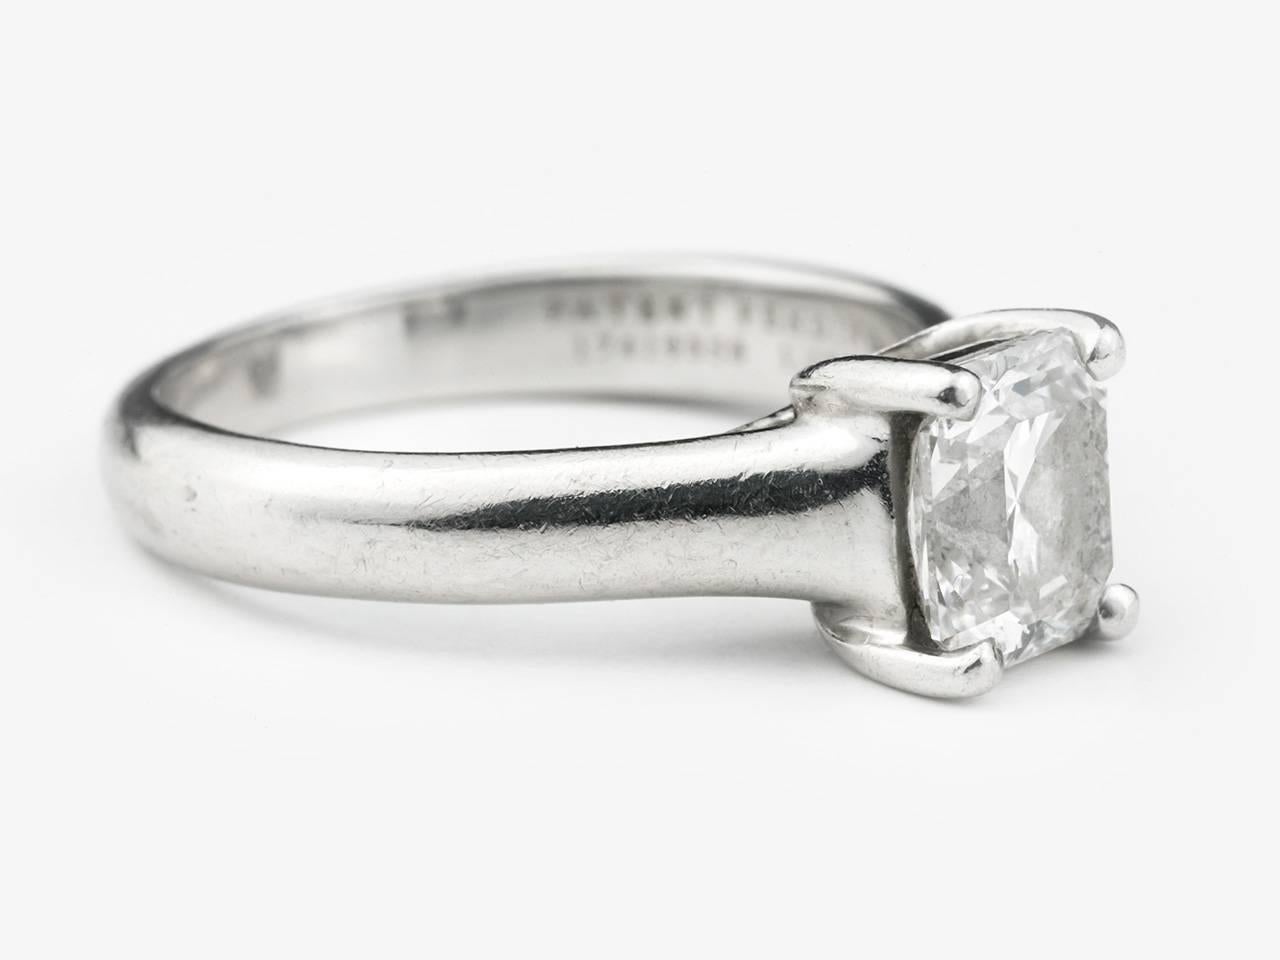 Platinum ring centering a 1.13 carat square mixed cut diamond, graded D color, VVS2 clarity. Lucida by Tiffany and Co. Signed with Tiffany certificate.